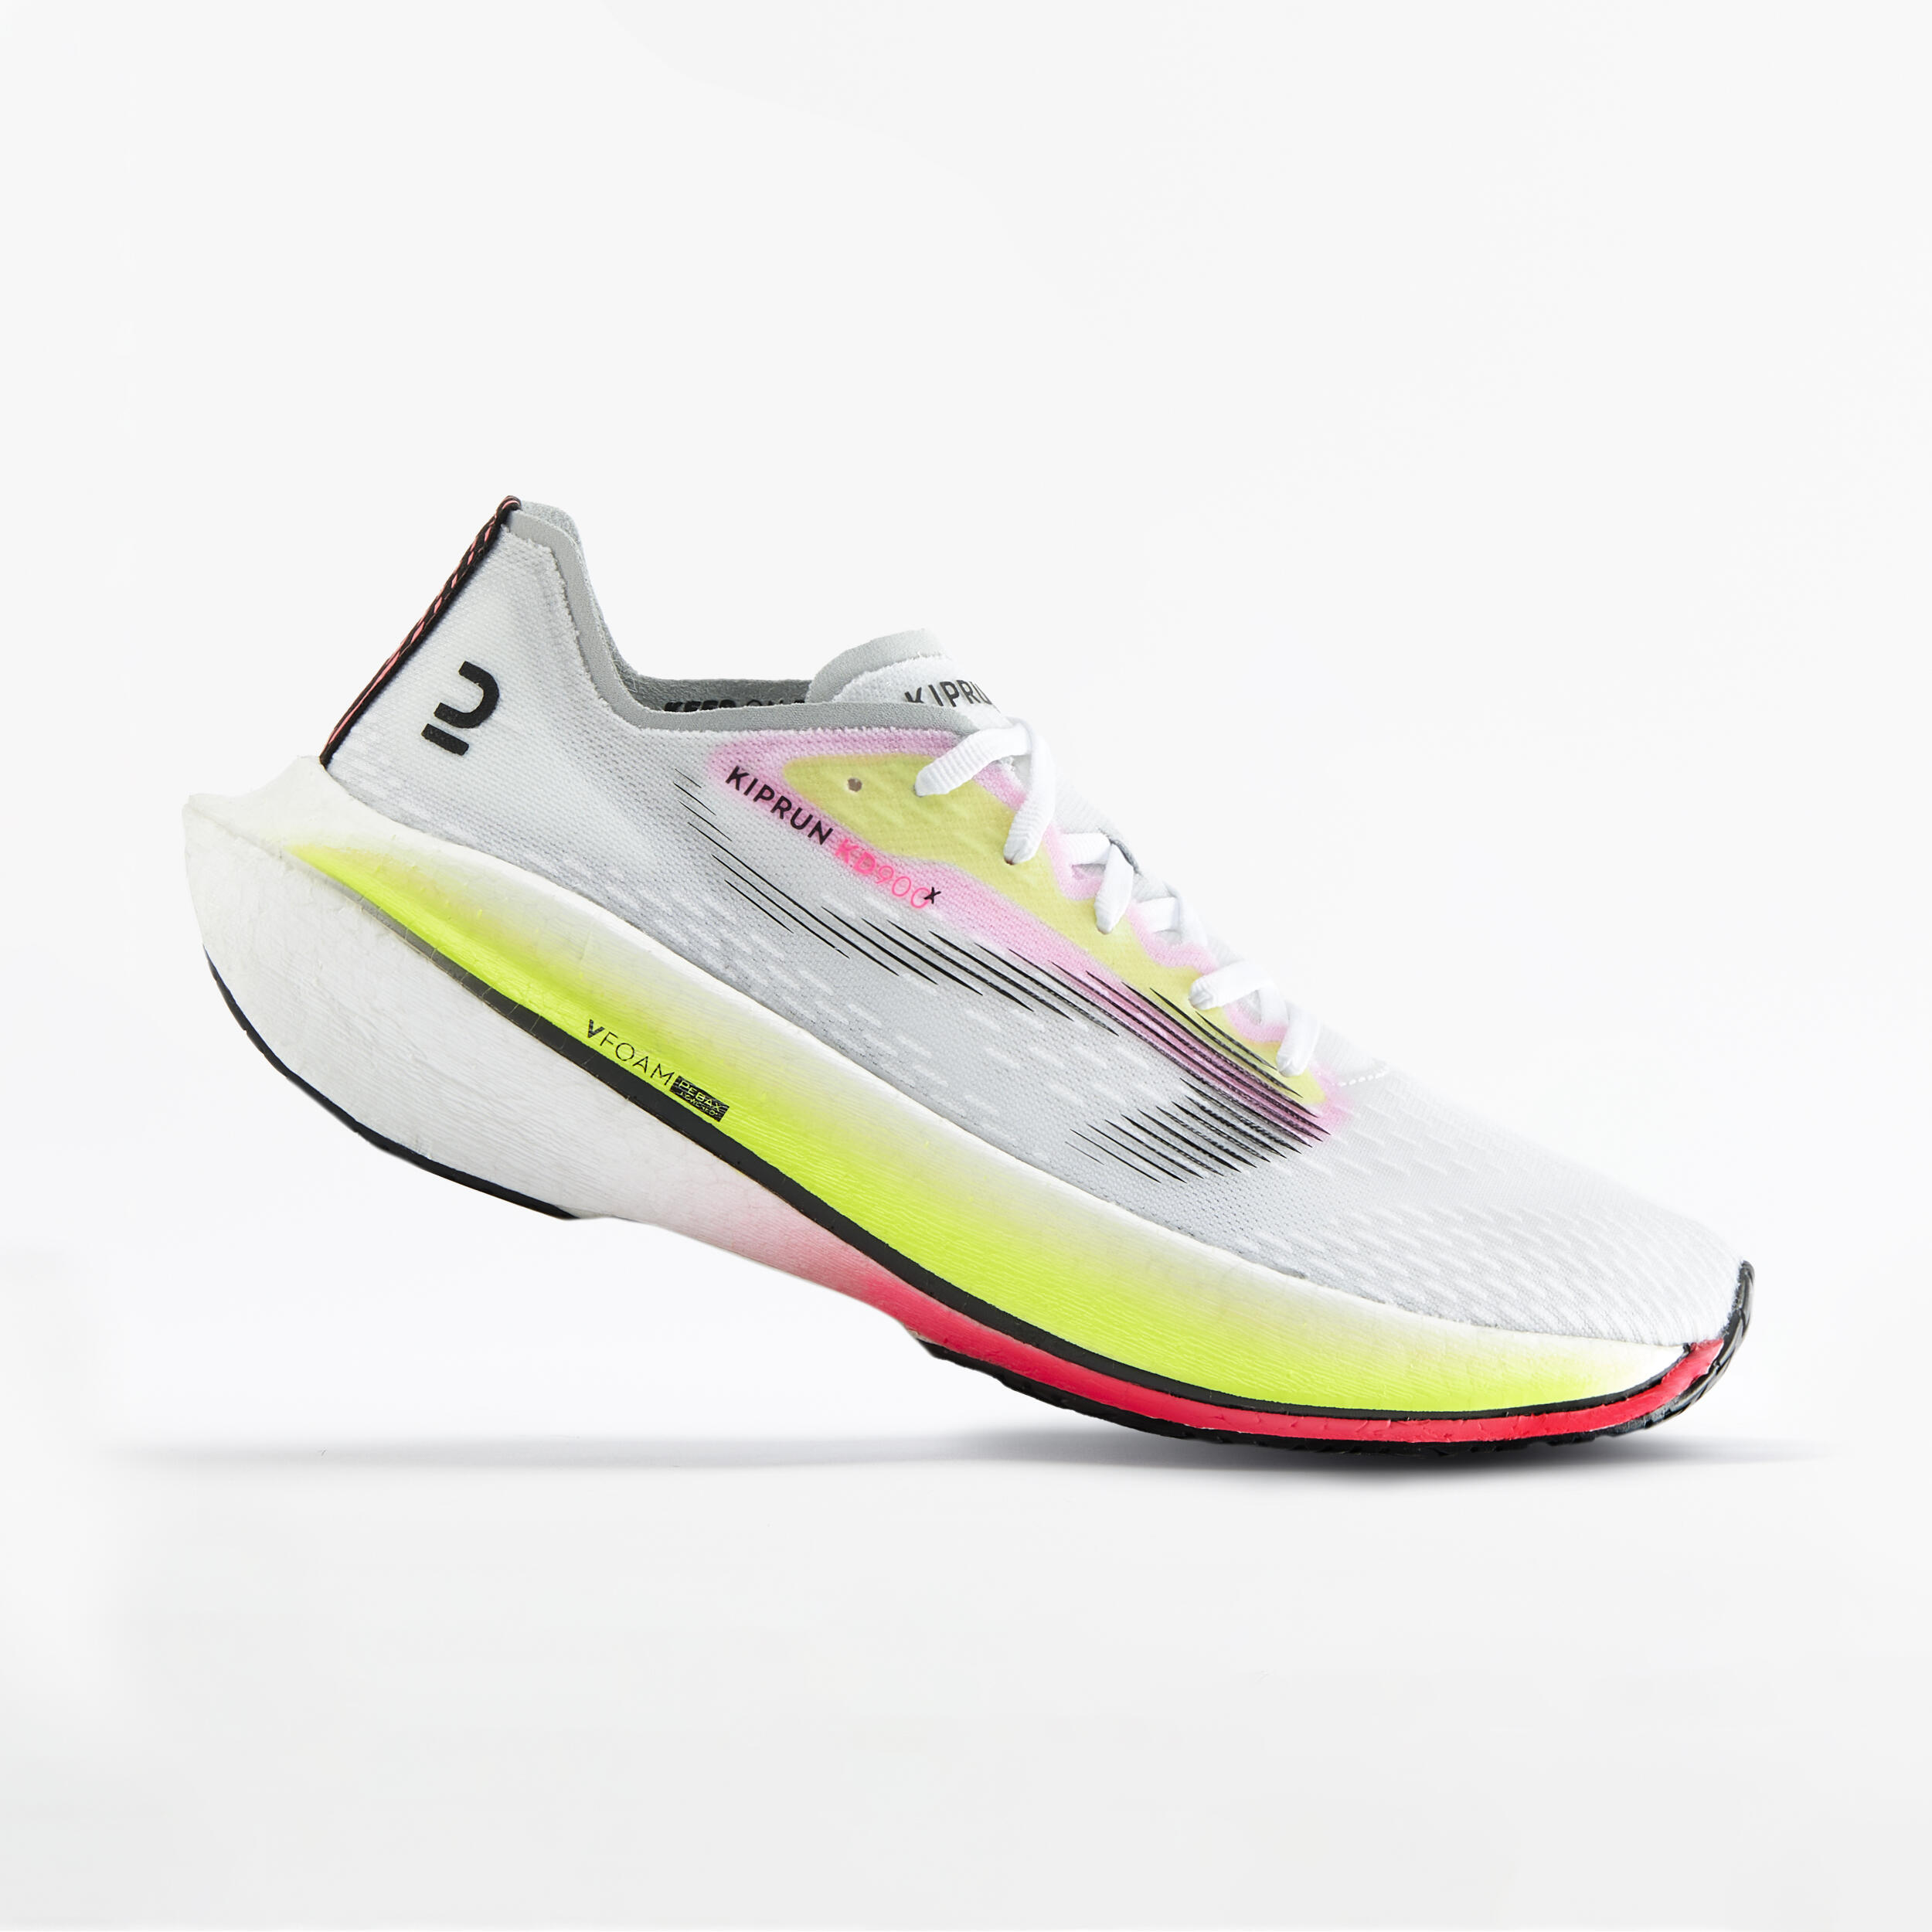 Decathlon Shoes: The best and Kiprun running shoes